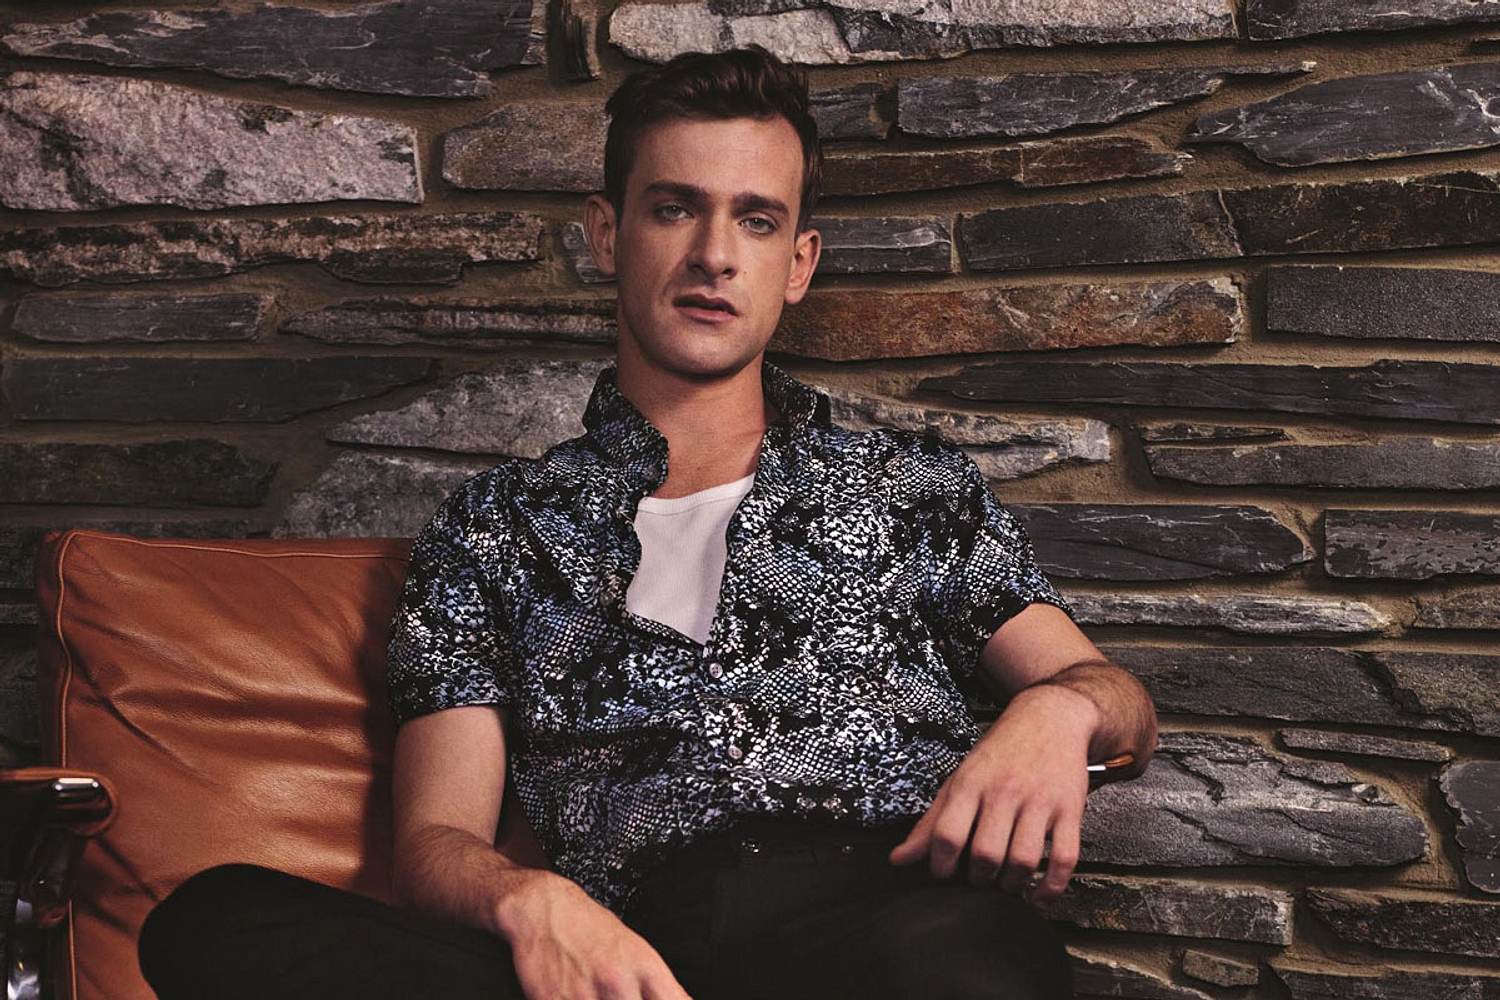 Josef Salvat hopes to “debut a few new songs” at Latitude 2015